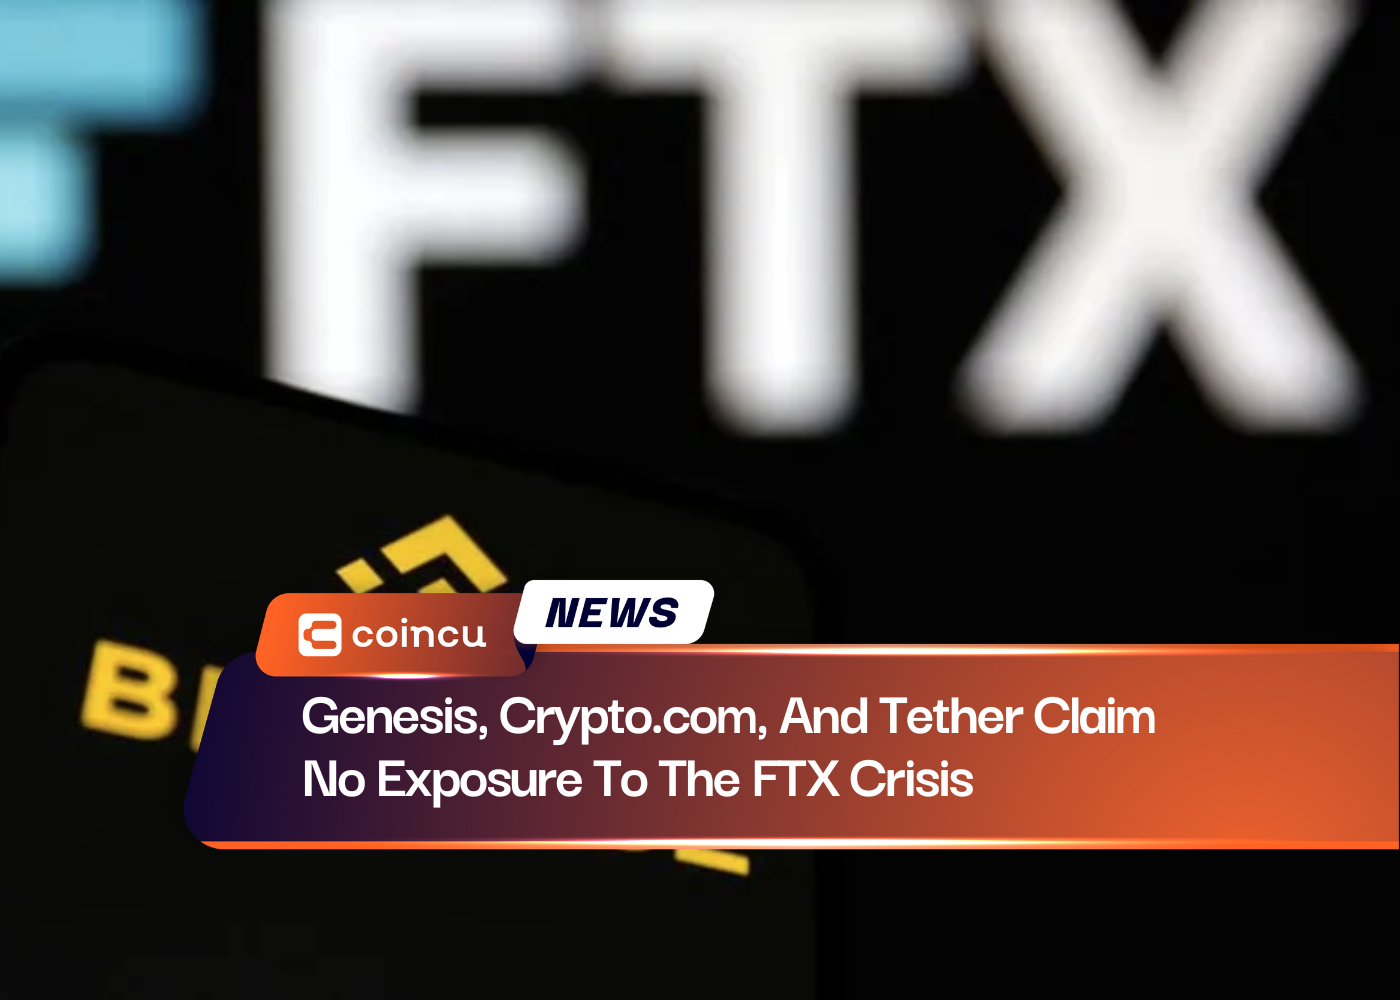 Genesis, Crypto.com, And Tether Claim No Exposure To The FTX Crisis